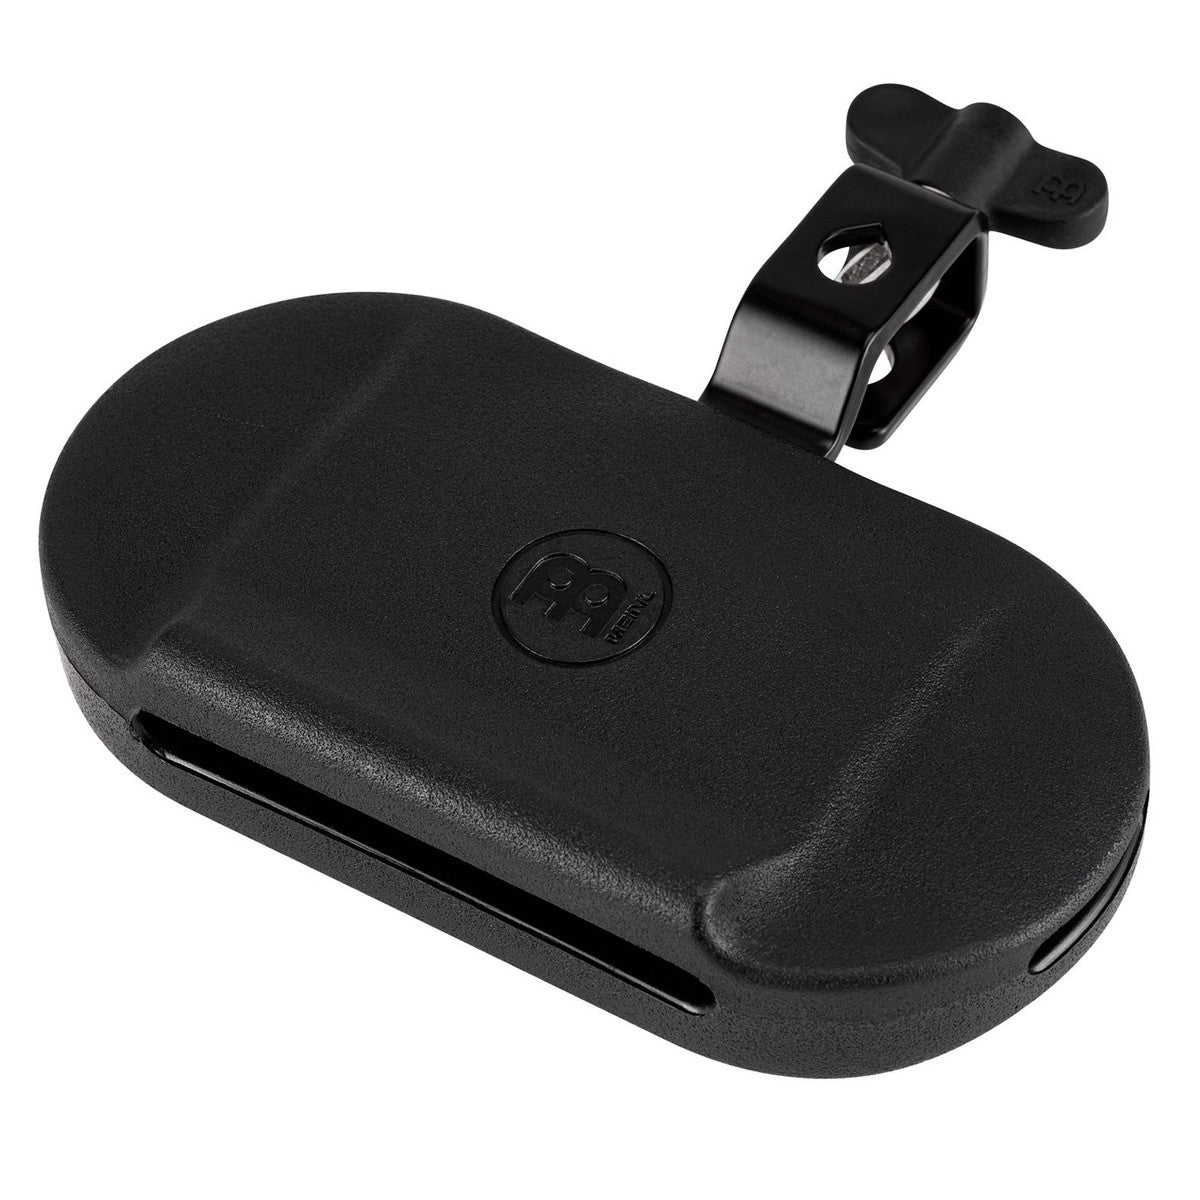 Meinl High Pitched Percussion Block